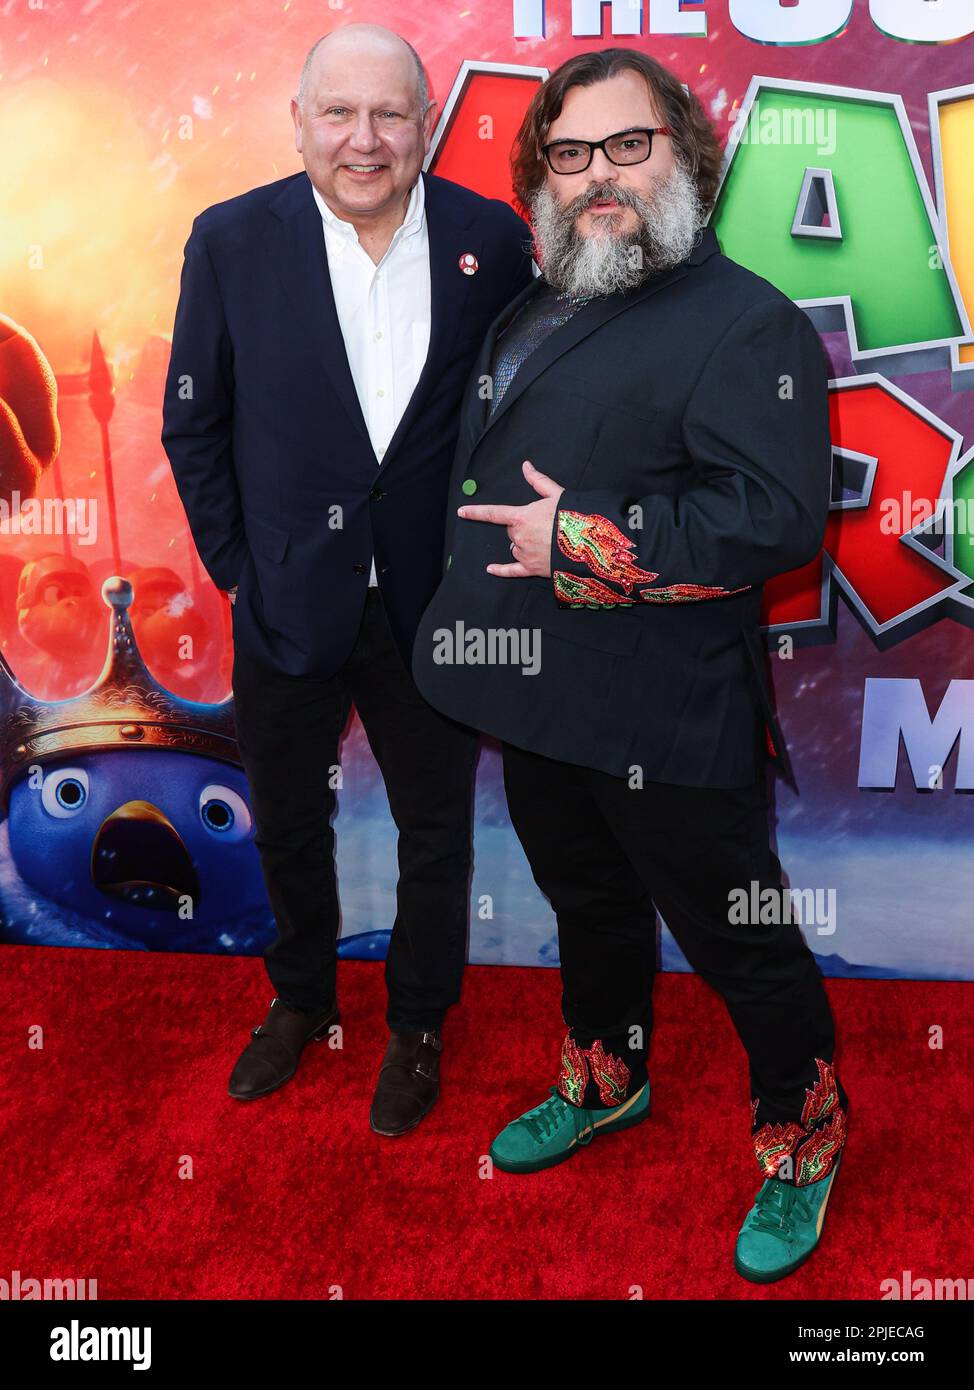 LOS ANGELES, CALIFORNIA, USA - APRIL 01: Chris Meledandri and Jack Black arrive at the Los Angeles Special Screening Of Universal Pictures, Nintendo And Illumination Entertainment's 'The Super Mario Bros. Movie' held at the Regal Cinemas LA Live & 4DX Movie on April 1, 2023 in Los Angeles, California, United States. (Photo by Xavier Collin/Image Press Agency) Stock Photo